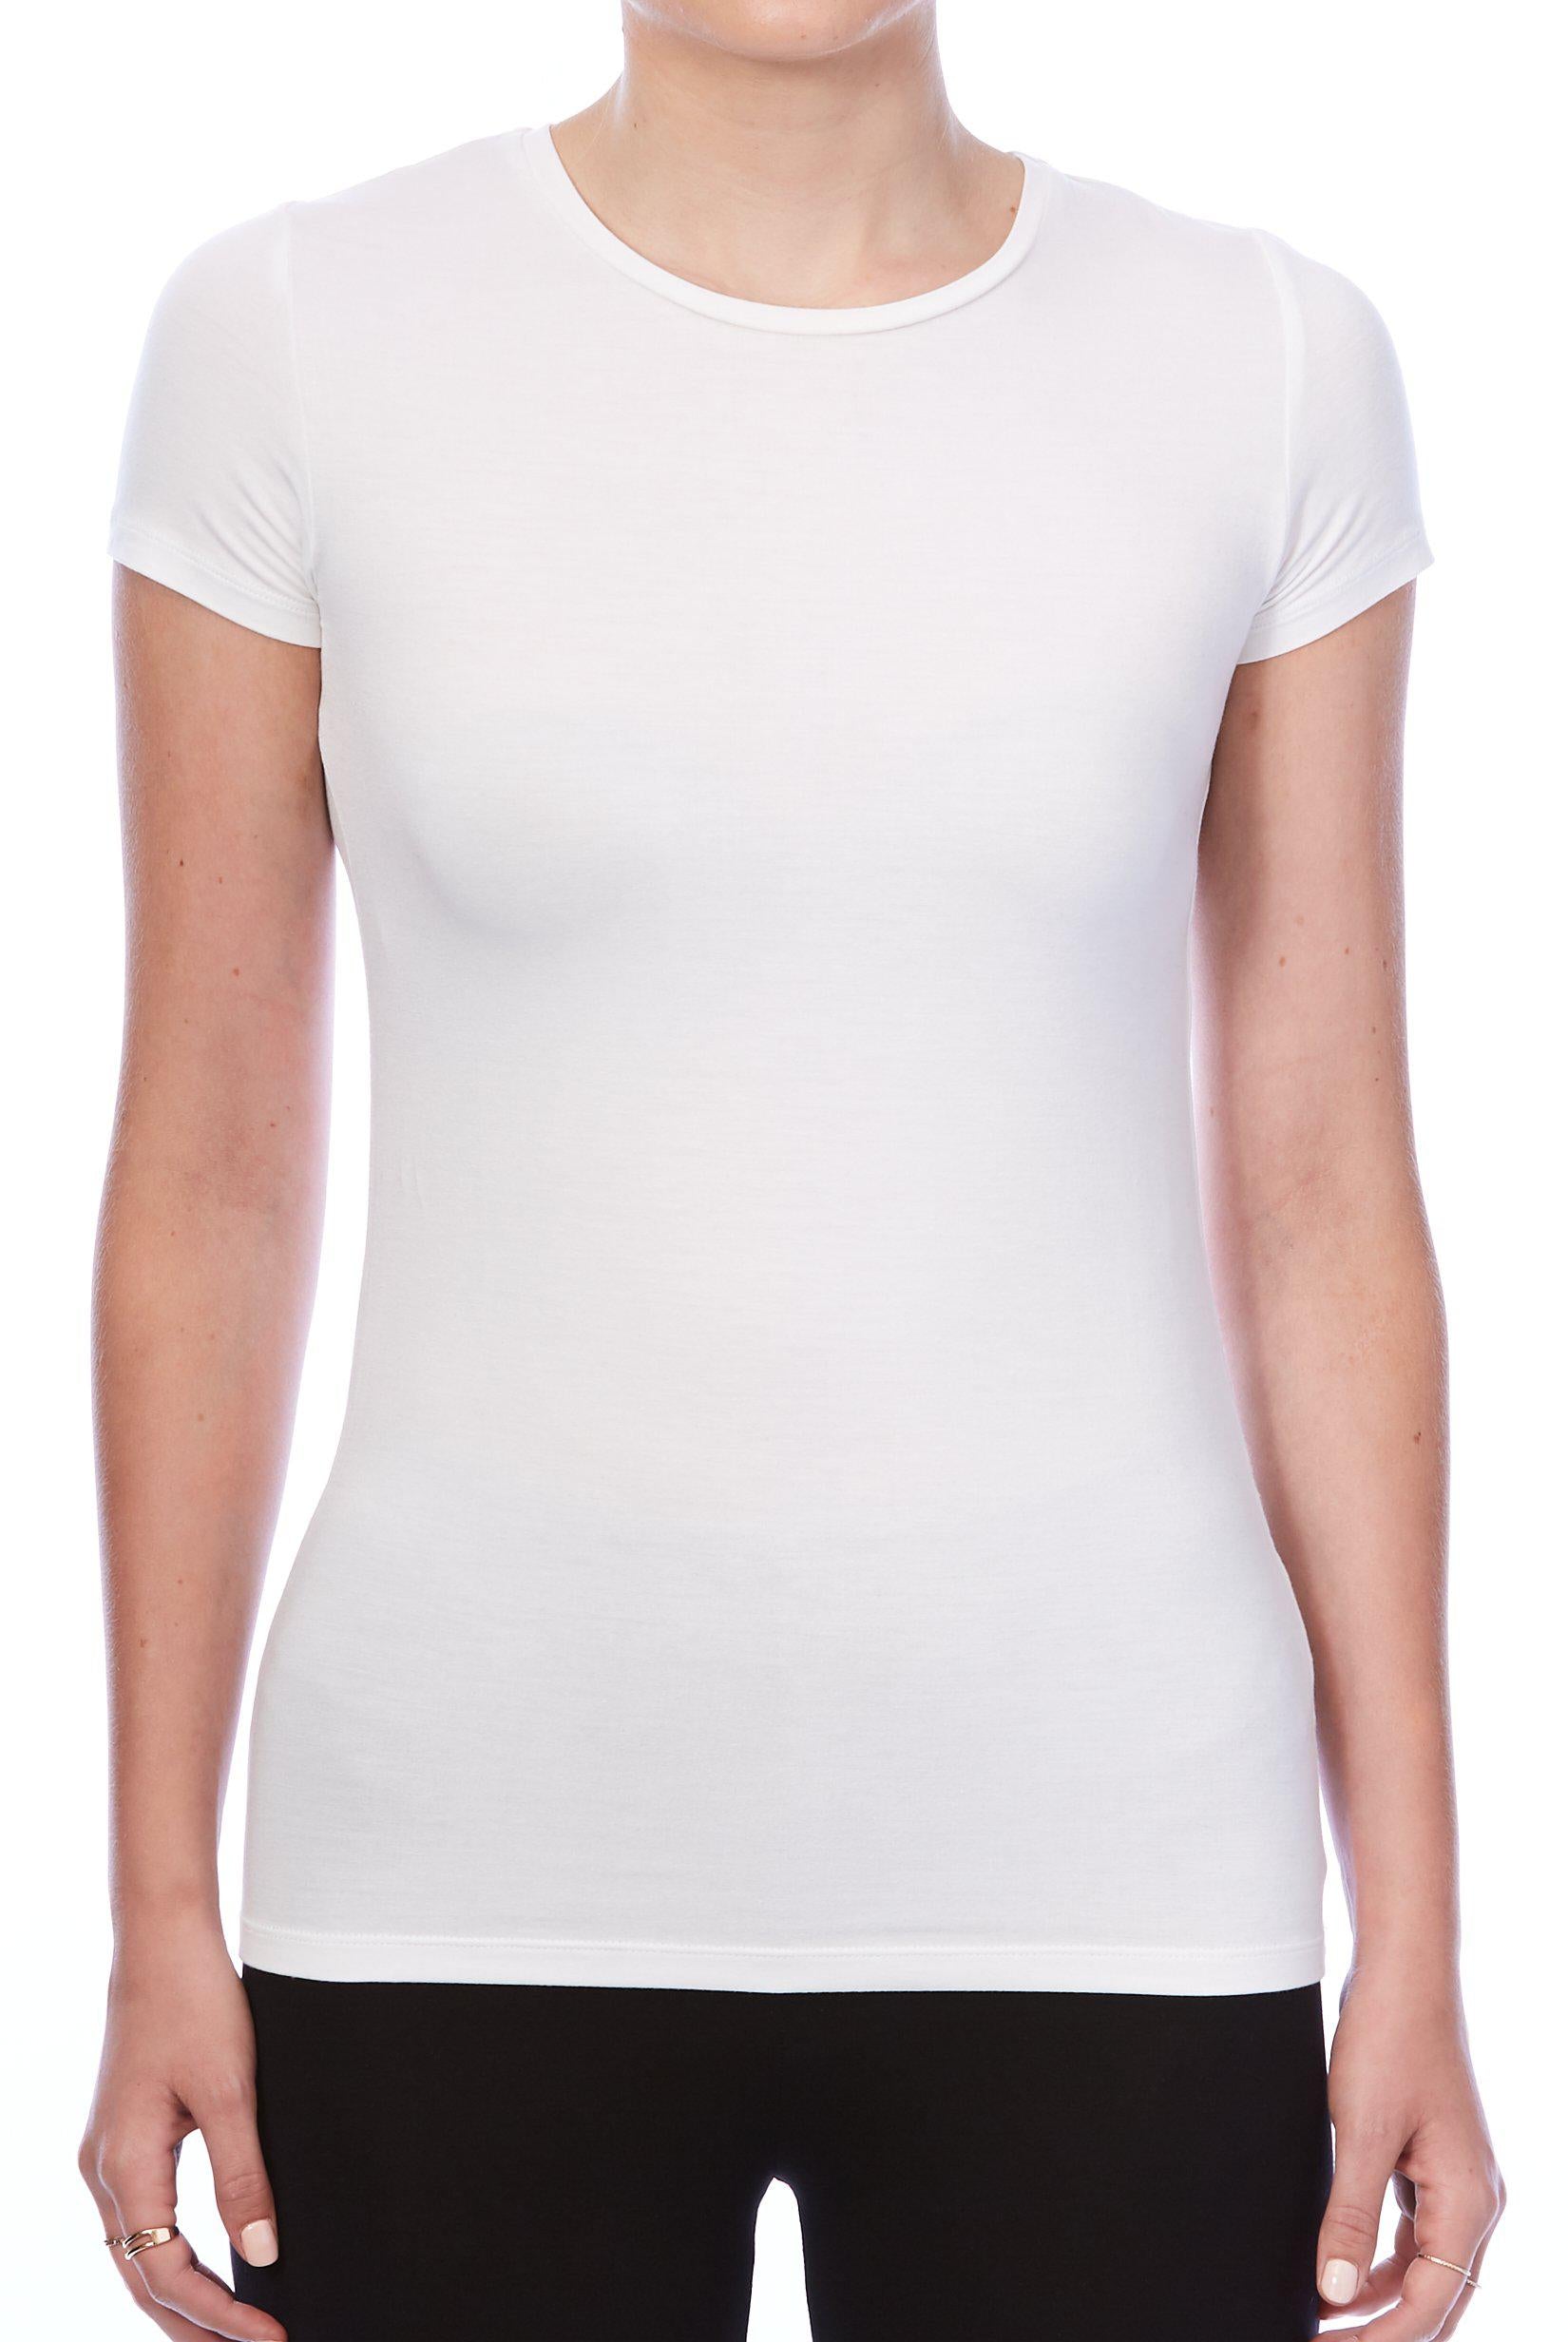 Luxury Soft Touch Crew Neck Short-Sleeve T-Shirt-Tops-Majestic Filatures-White-1-Mercantile Portland